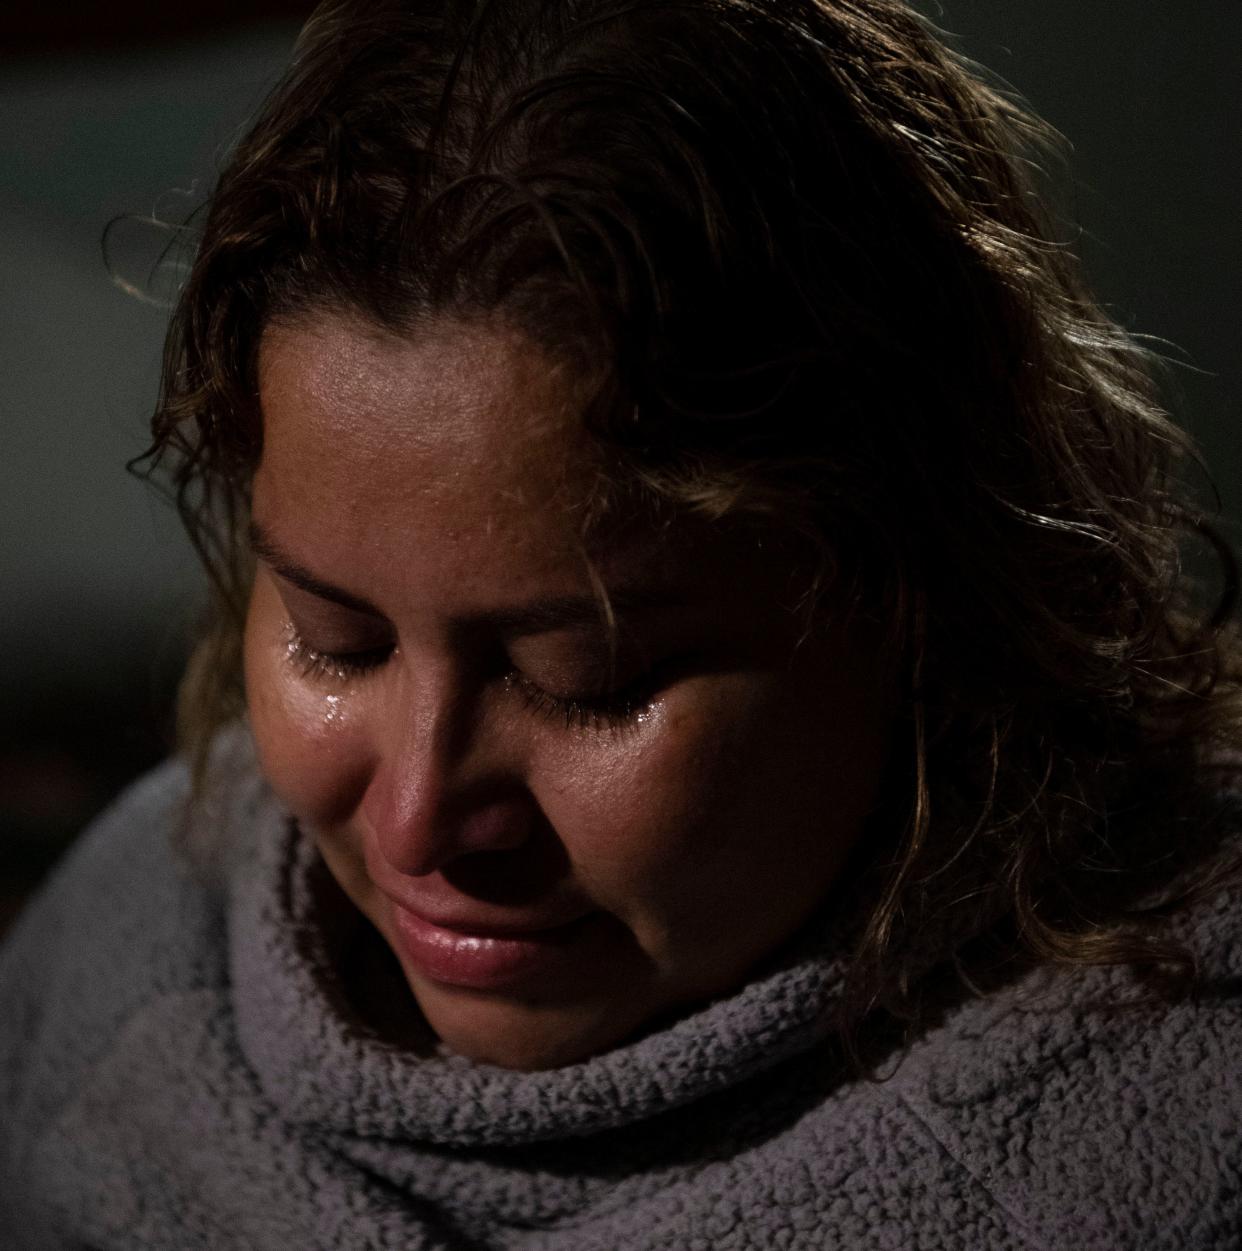 Luisa Hidalgo, 31, from El Salvador, sits for a portrait in Hotel Salazar in Tijuana, Mexico on Feb. 14, 2019 while waiting to present herself at the border to ask for asylum and to be reunited with her daughter. She is among the 29 parents who re-entered the U.S. (Photo: The Washington Post via Getty Images)